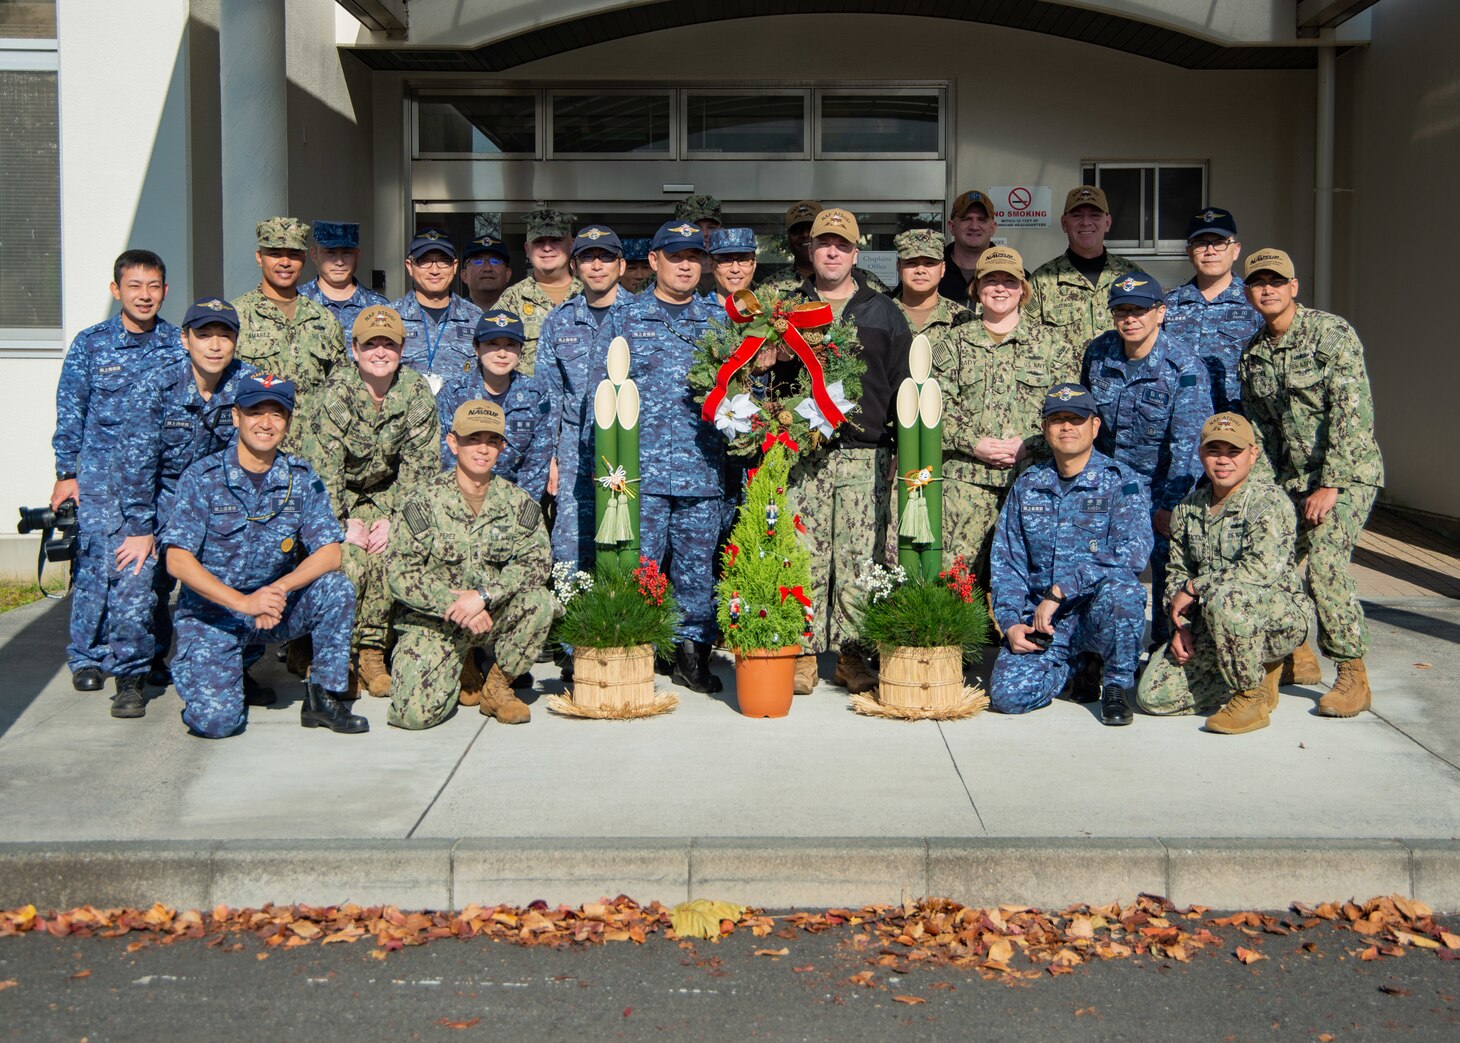 Chief petty officers from the U.S. Navy and the Japan
Maritime Self Defense Force (JMSDF) exchange a Christmas wreath and kodomatsu, or pine gate, at Naval Air Facility Atsugi. Kodomatsu are traditional Japanese decorations placed in front of homes and offices in pairs around the New Year to welcome kami (spirits) that will bring bountiful harvests and ancestral blessings in the New Year.